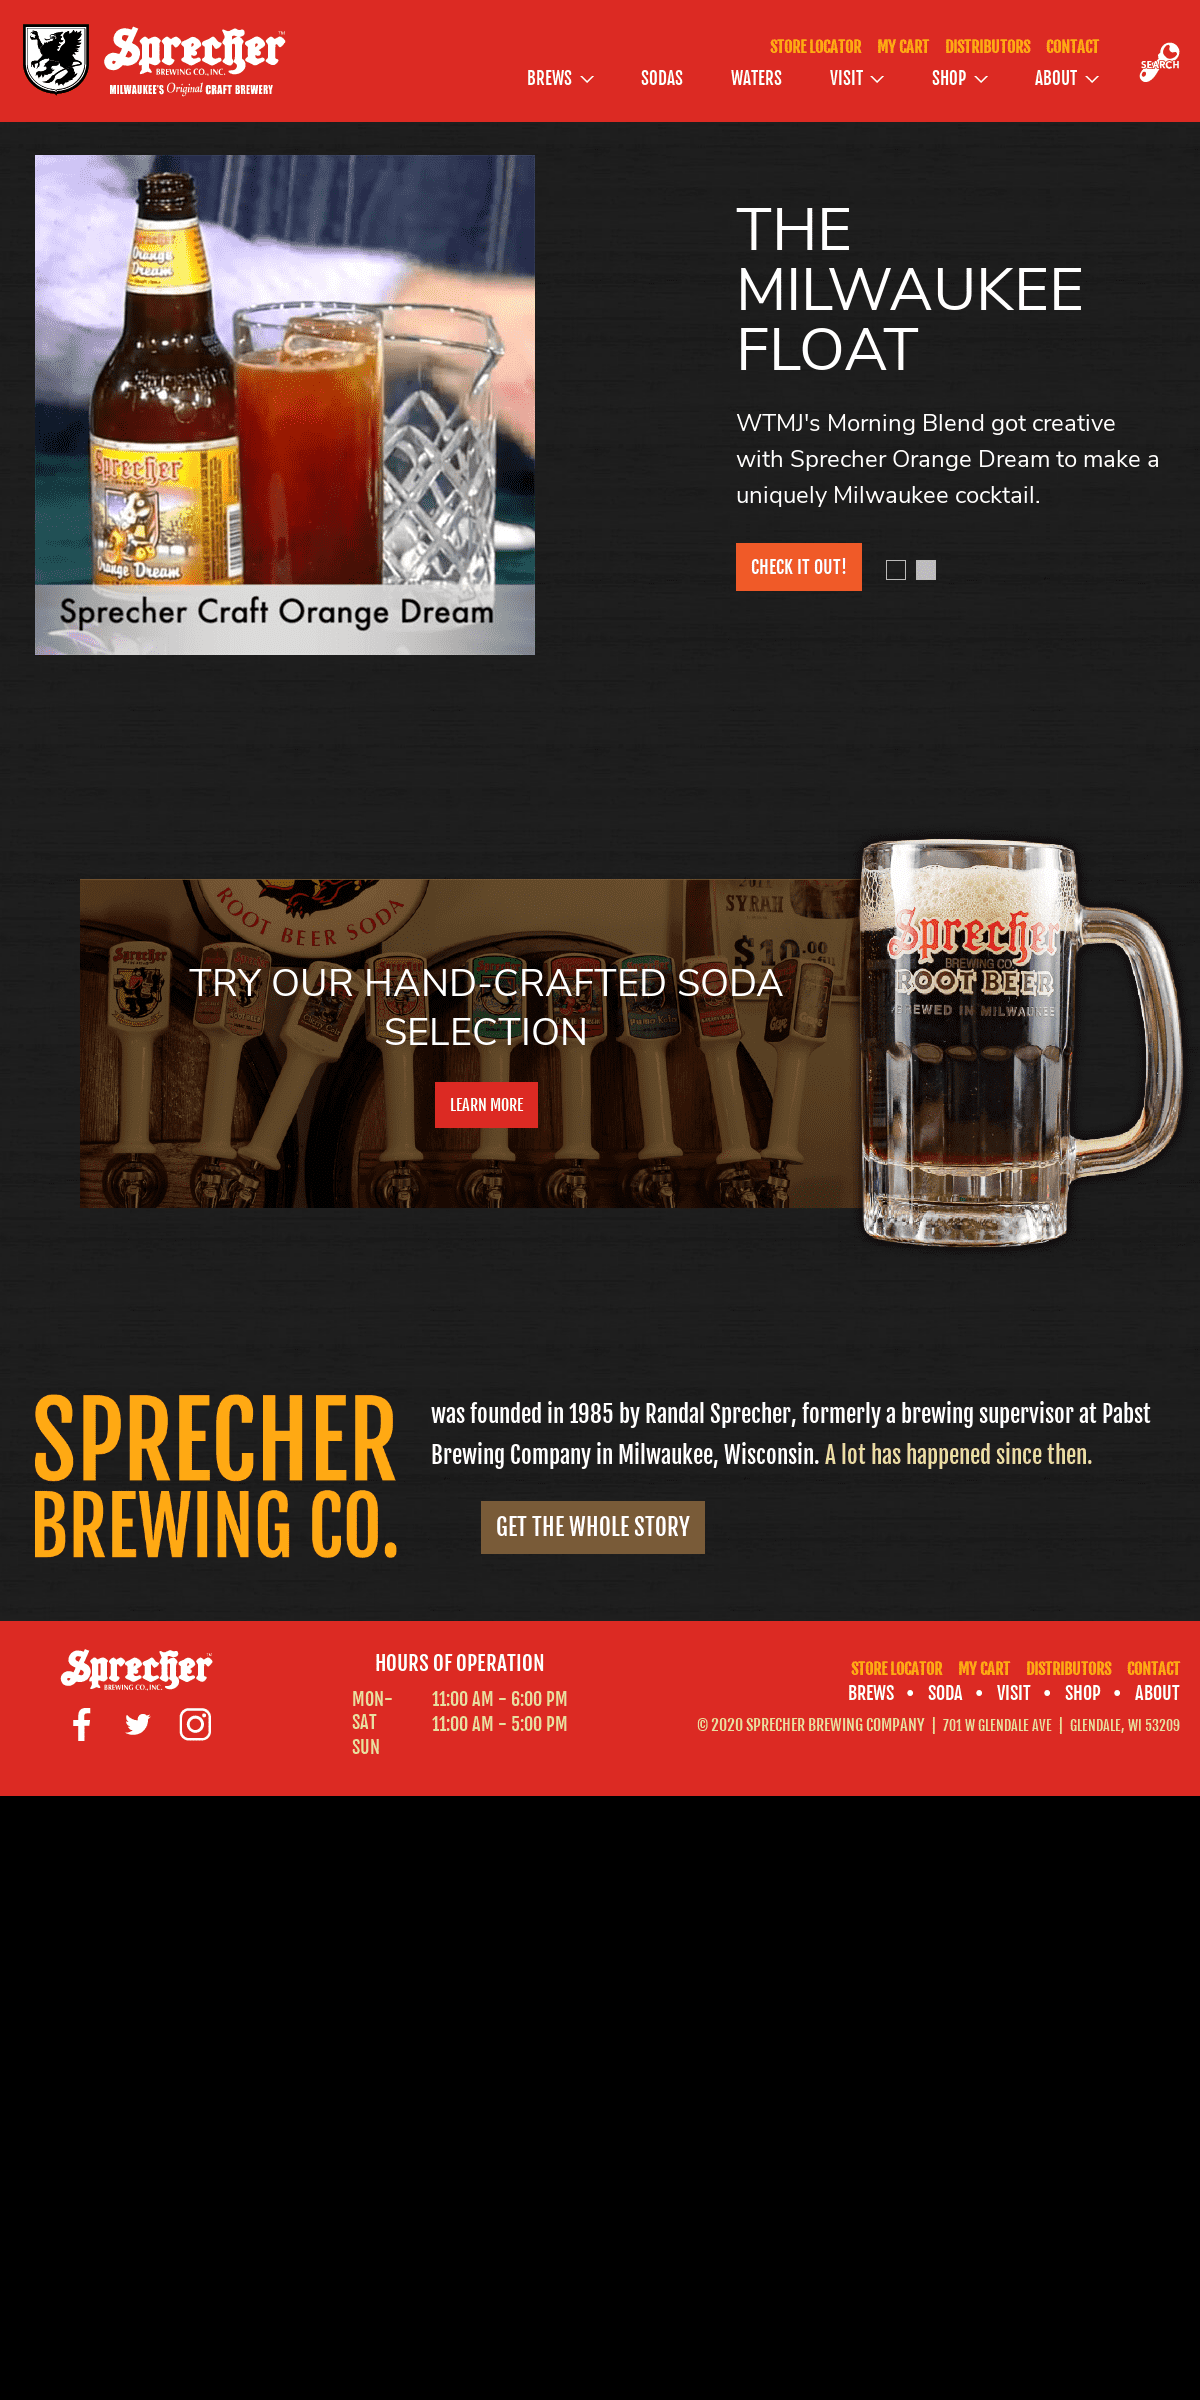 A complete backup of sprecherbrewery.com